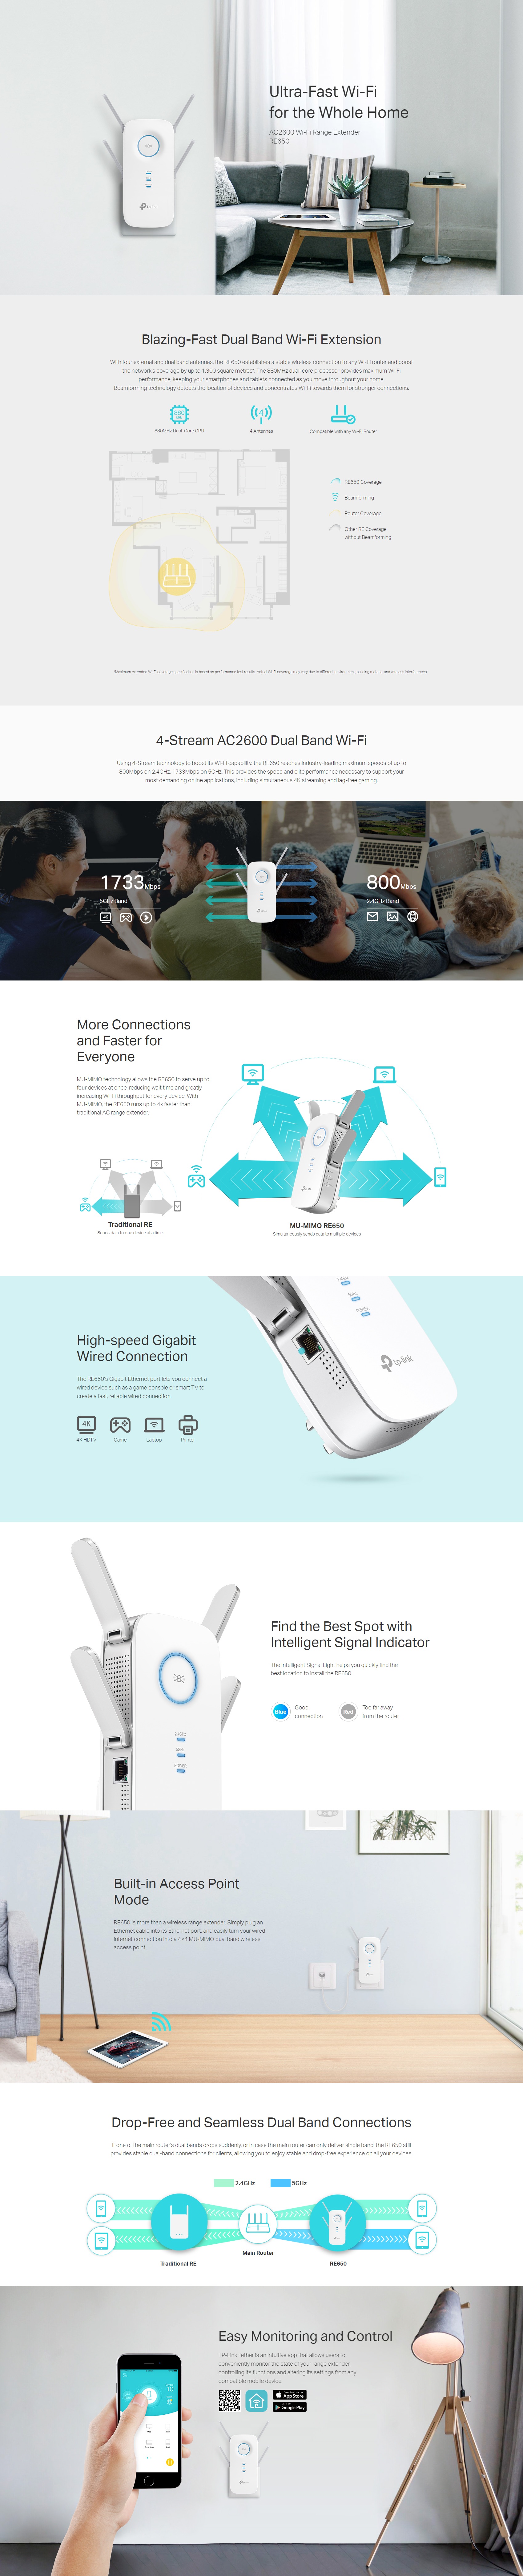 A large marketing image providing additional information about the product TP-Link RE650 - AC2600 Wi-Fi 5 Range Extender - Additional alt info not provided